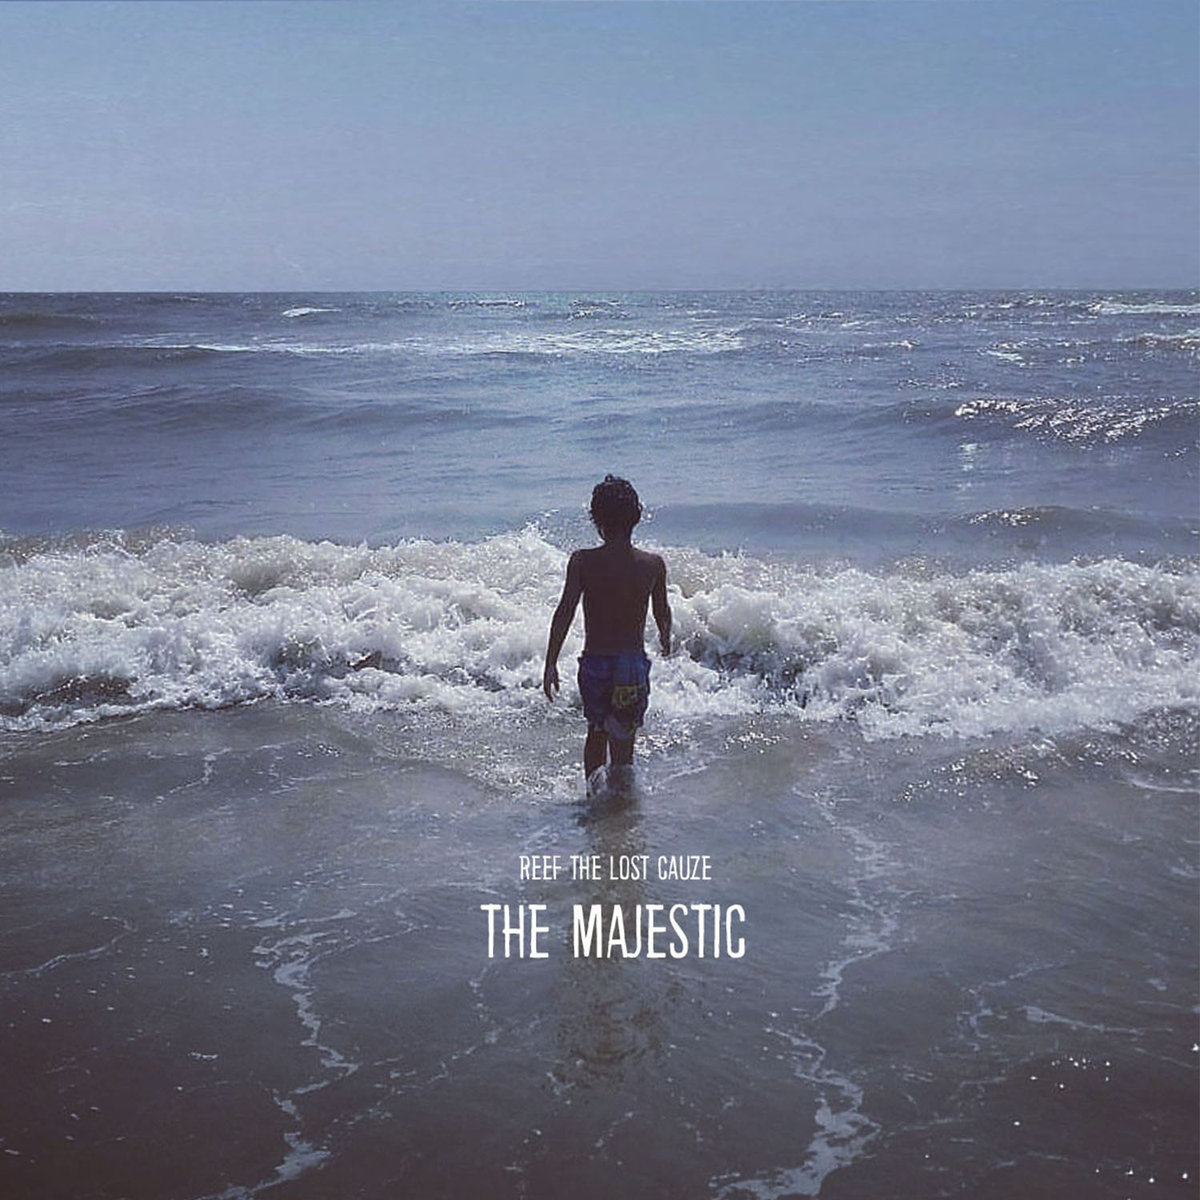 Reef The Lost Cauze - The Majestic (Official Video) Directed By Lawrence Arnell